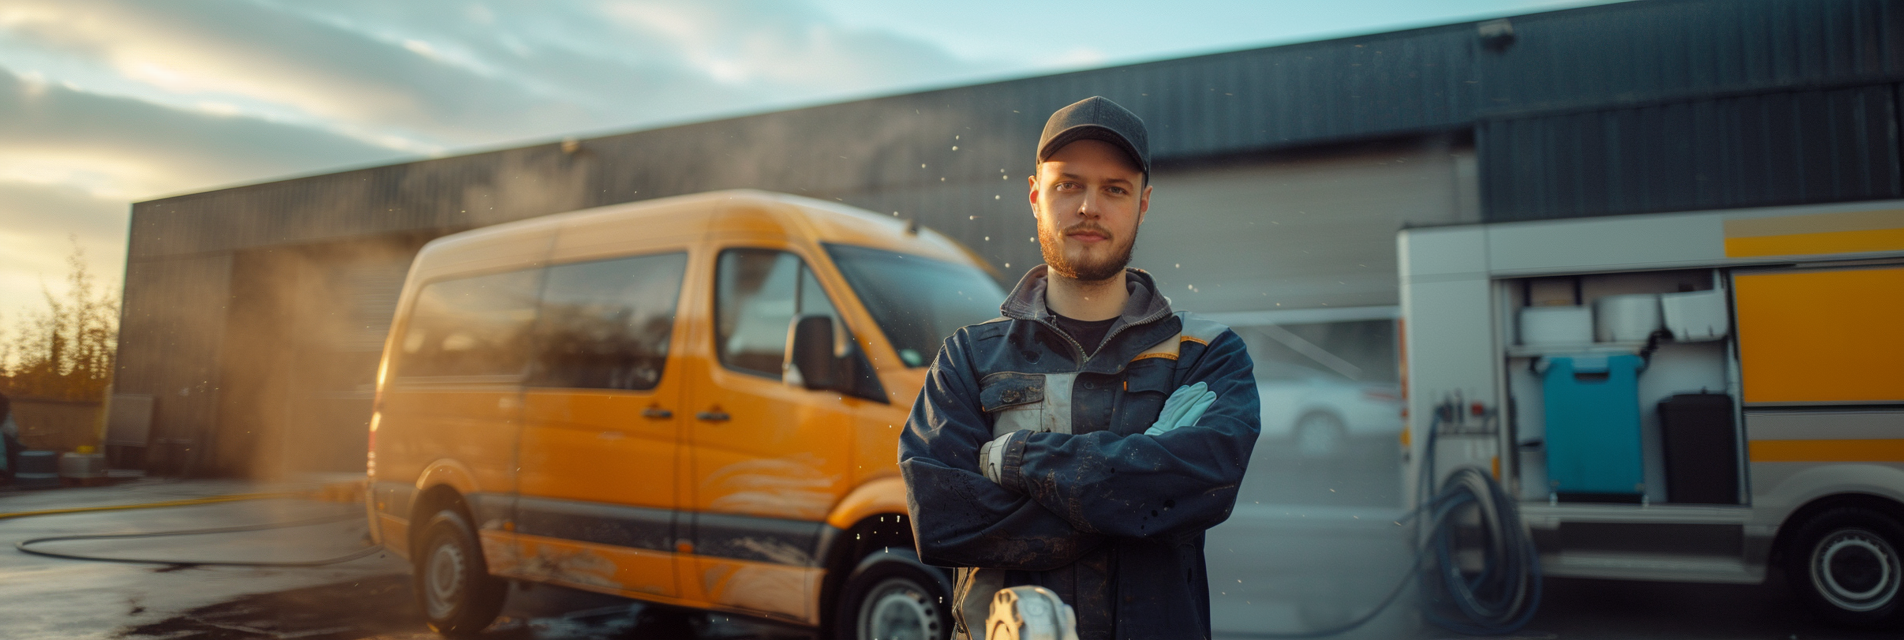 how-to-start-a-pressure-washing-business-truck-owner-man